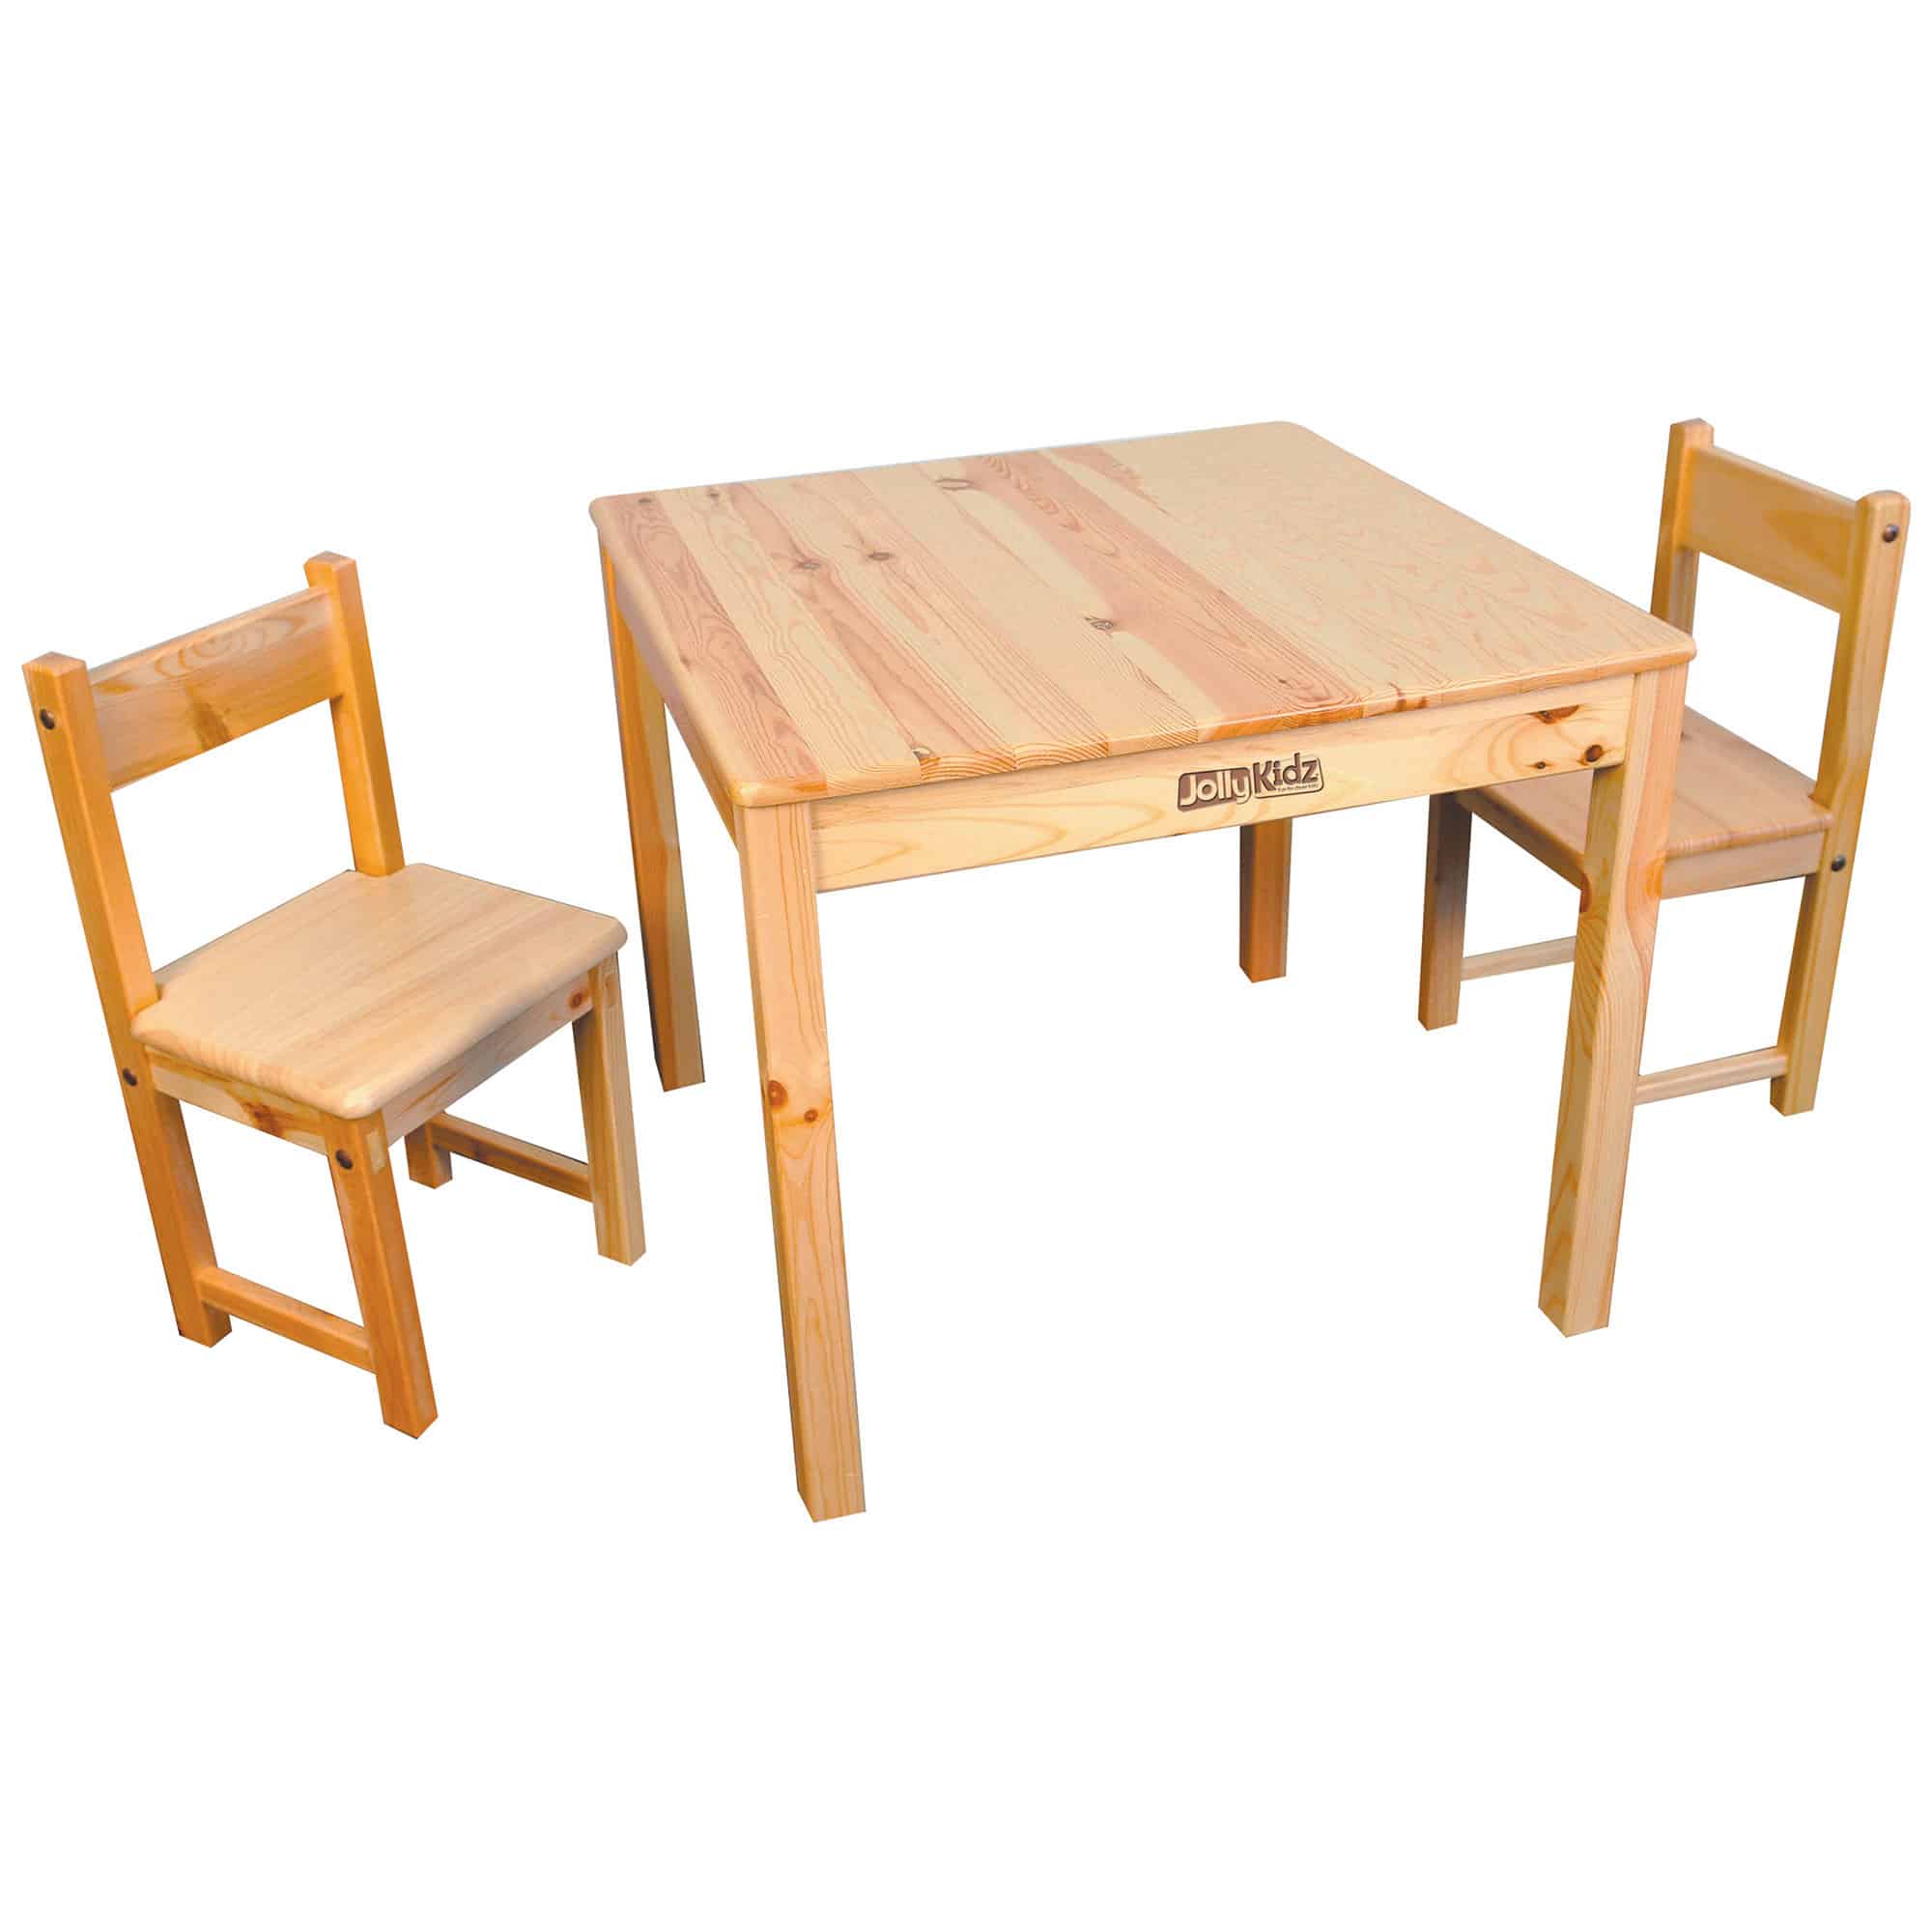 Jolly Kidz Table And Chairs - Brightway Setting - Wood